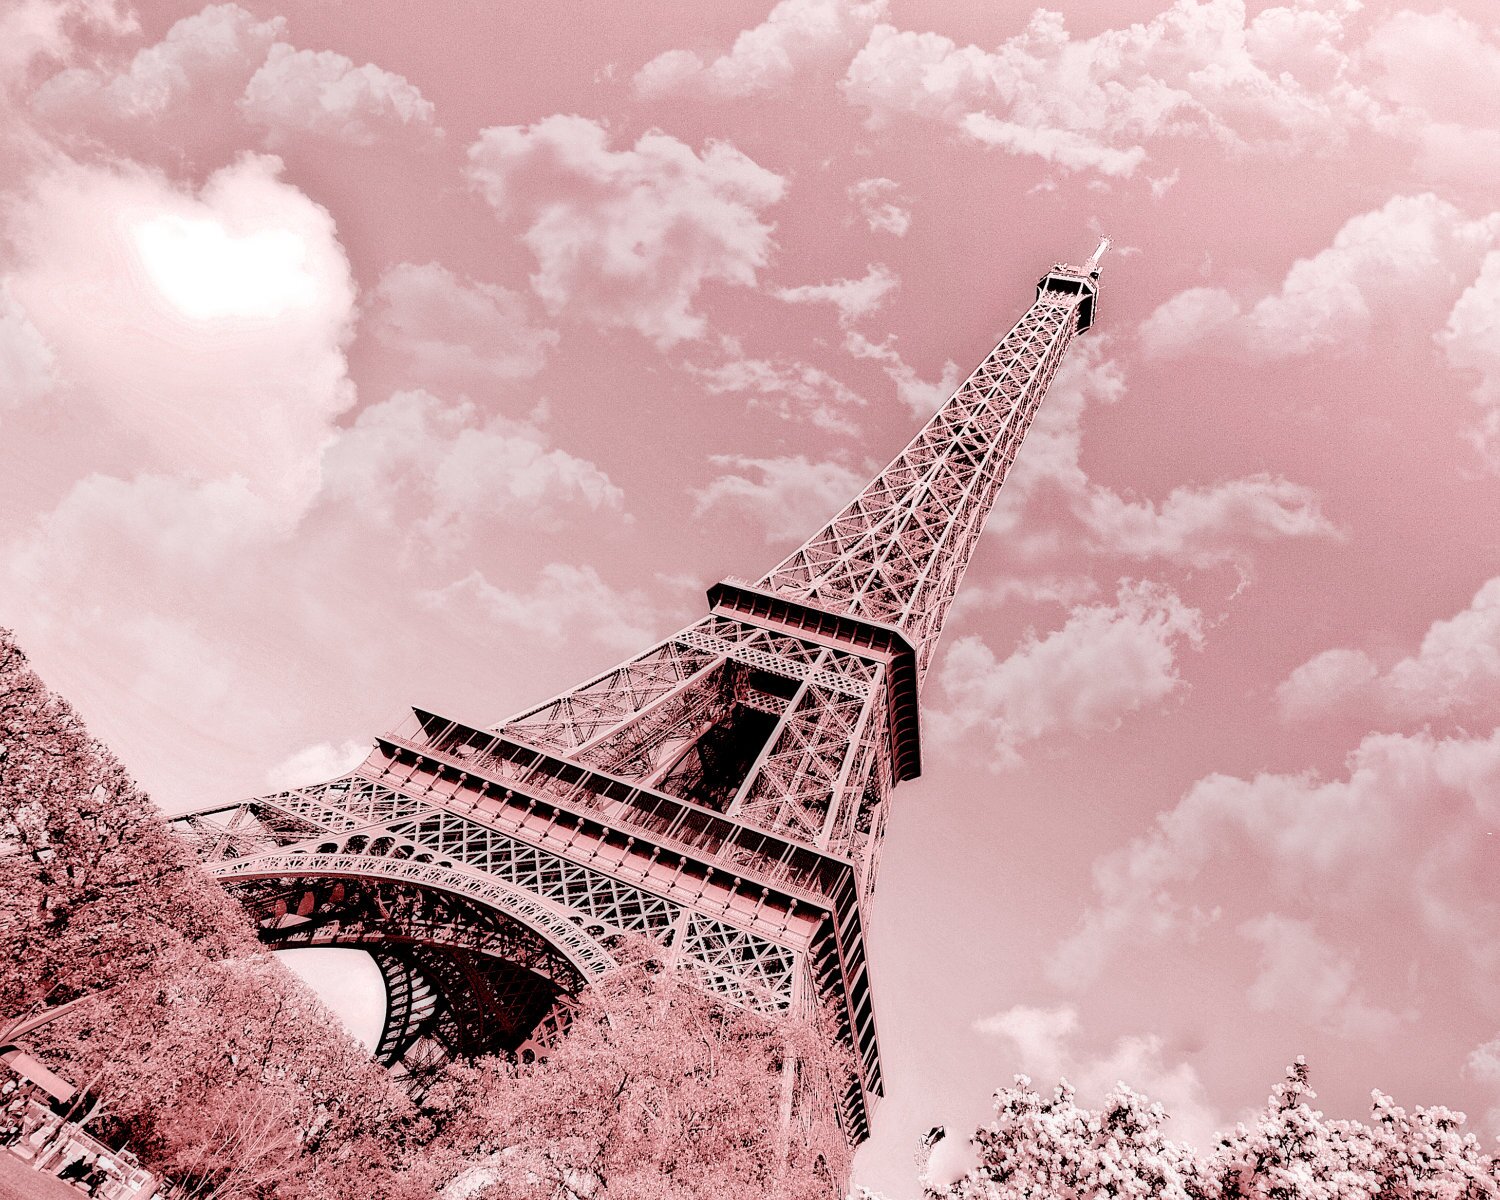 Loves Paris and Taylor Swift!